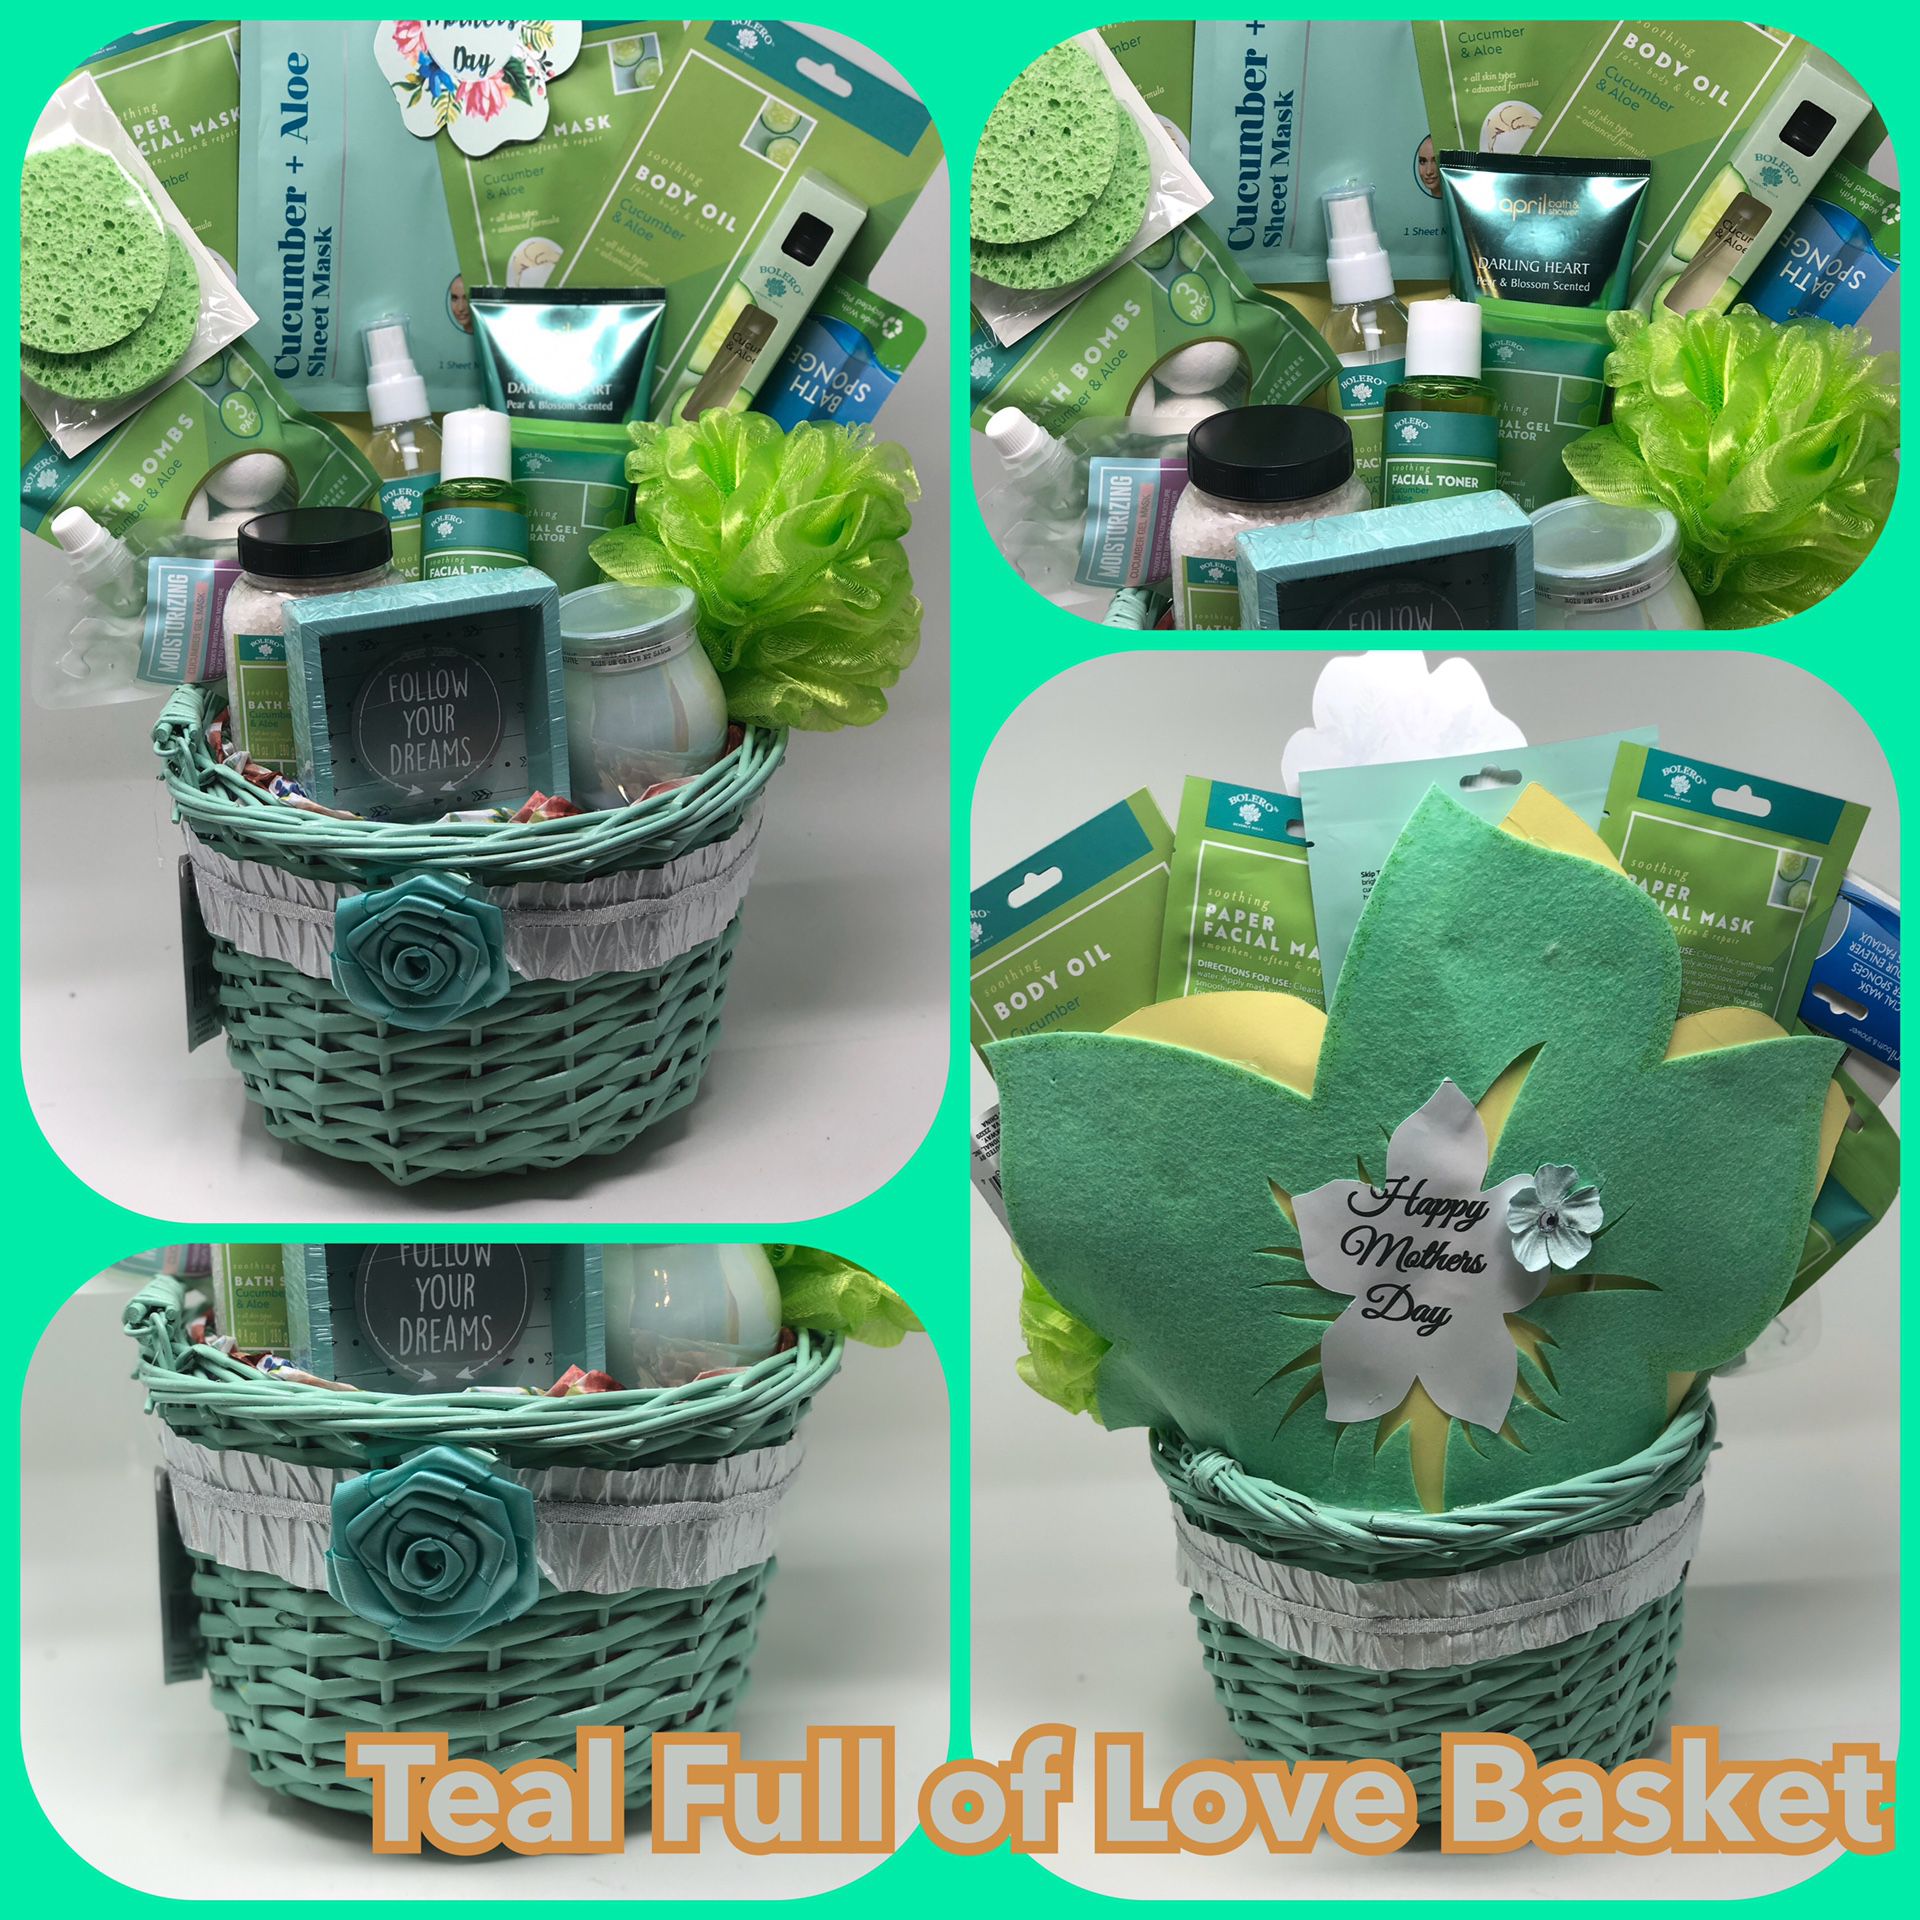 Mother’s Day Teal Full of Love Spa Basket